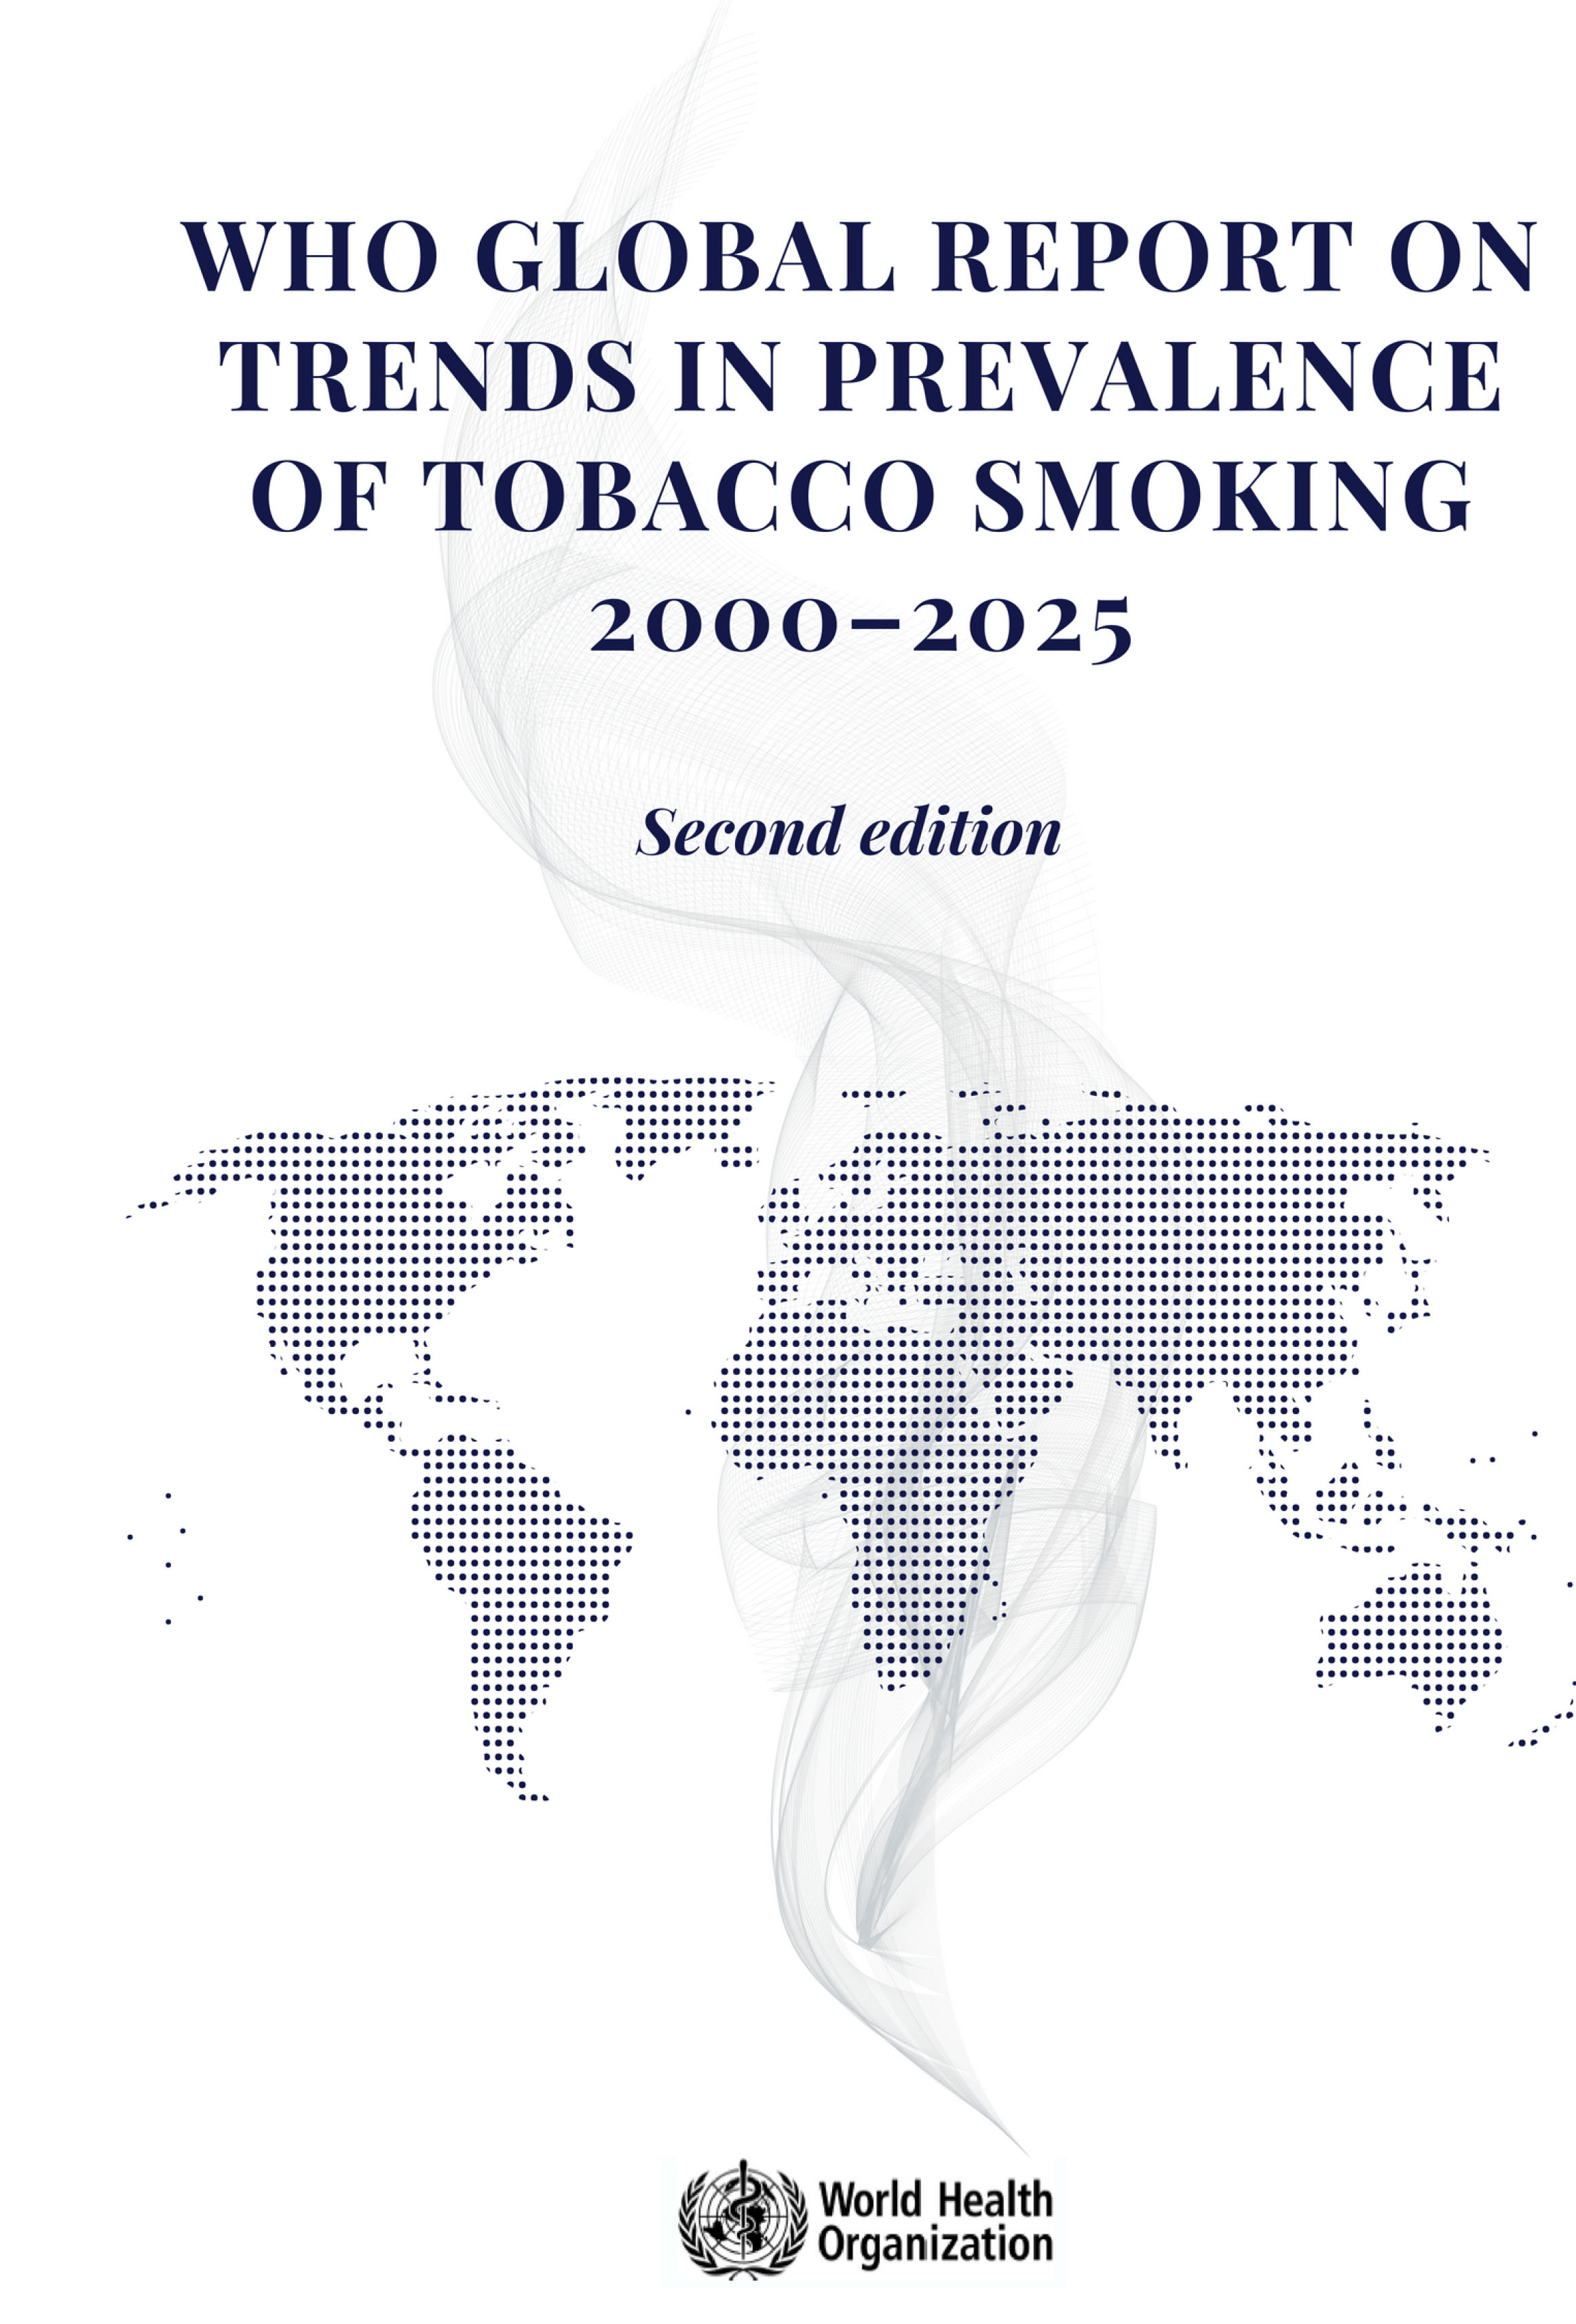 who global report on trends in prevalence of tobacco smoking 2000 - 2025